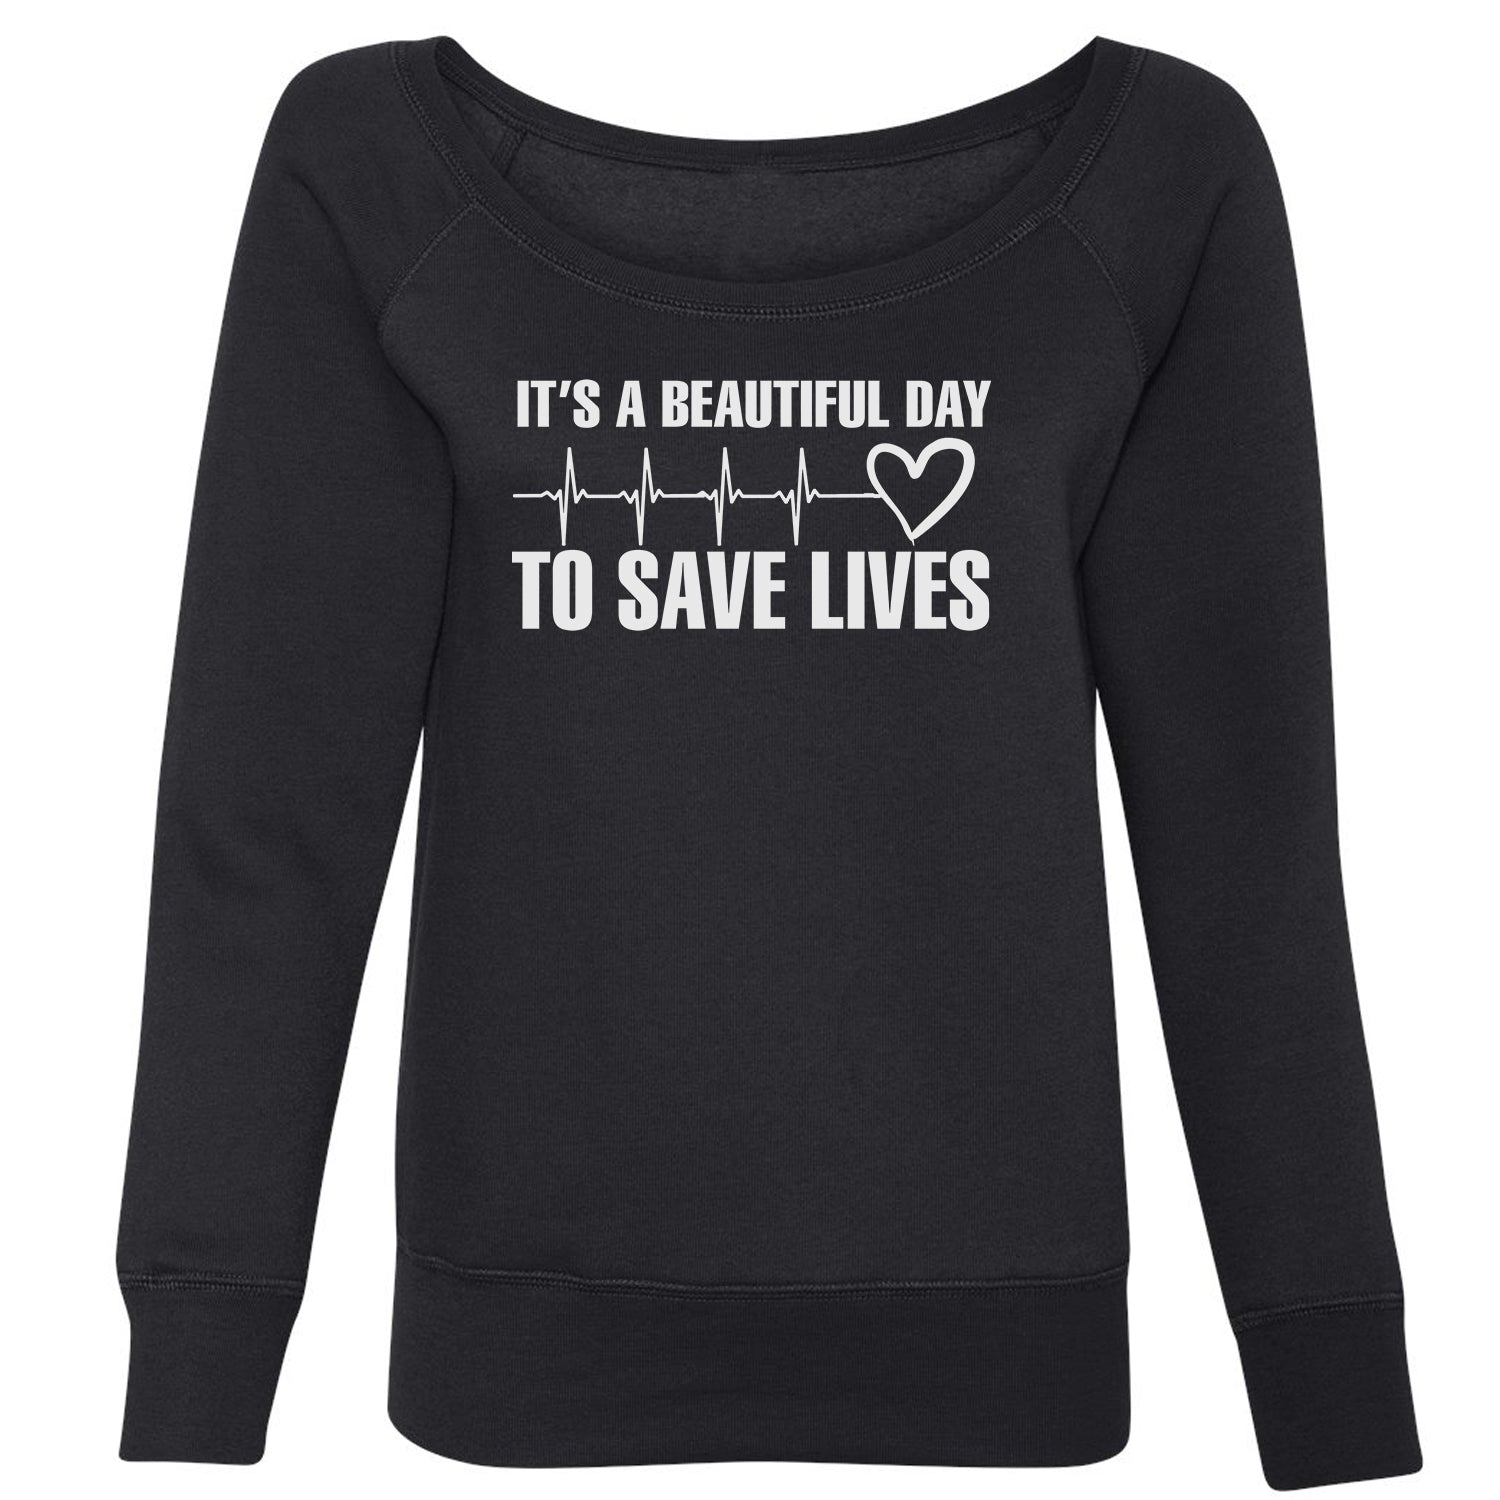 It's A Beautiful Day To Save Lives (White Print) Slouchy Off Shoulder Oversized Sweatshirt #expressiontees by Expression Tees